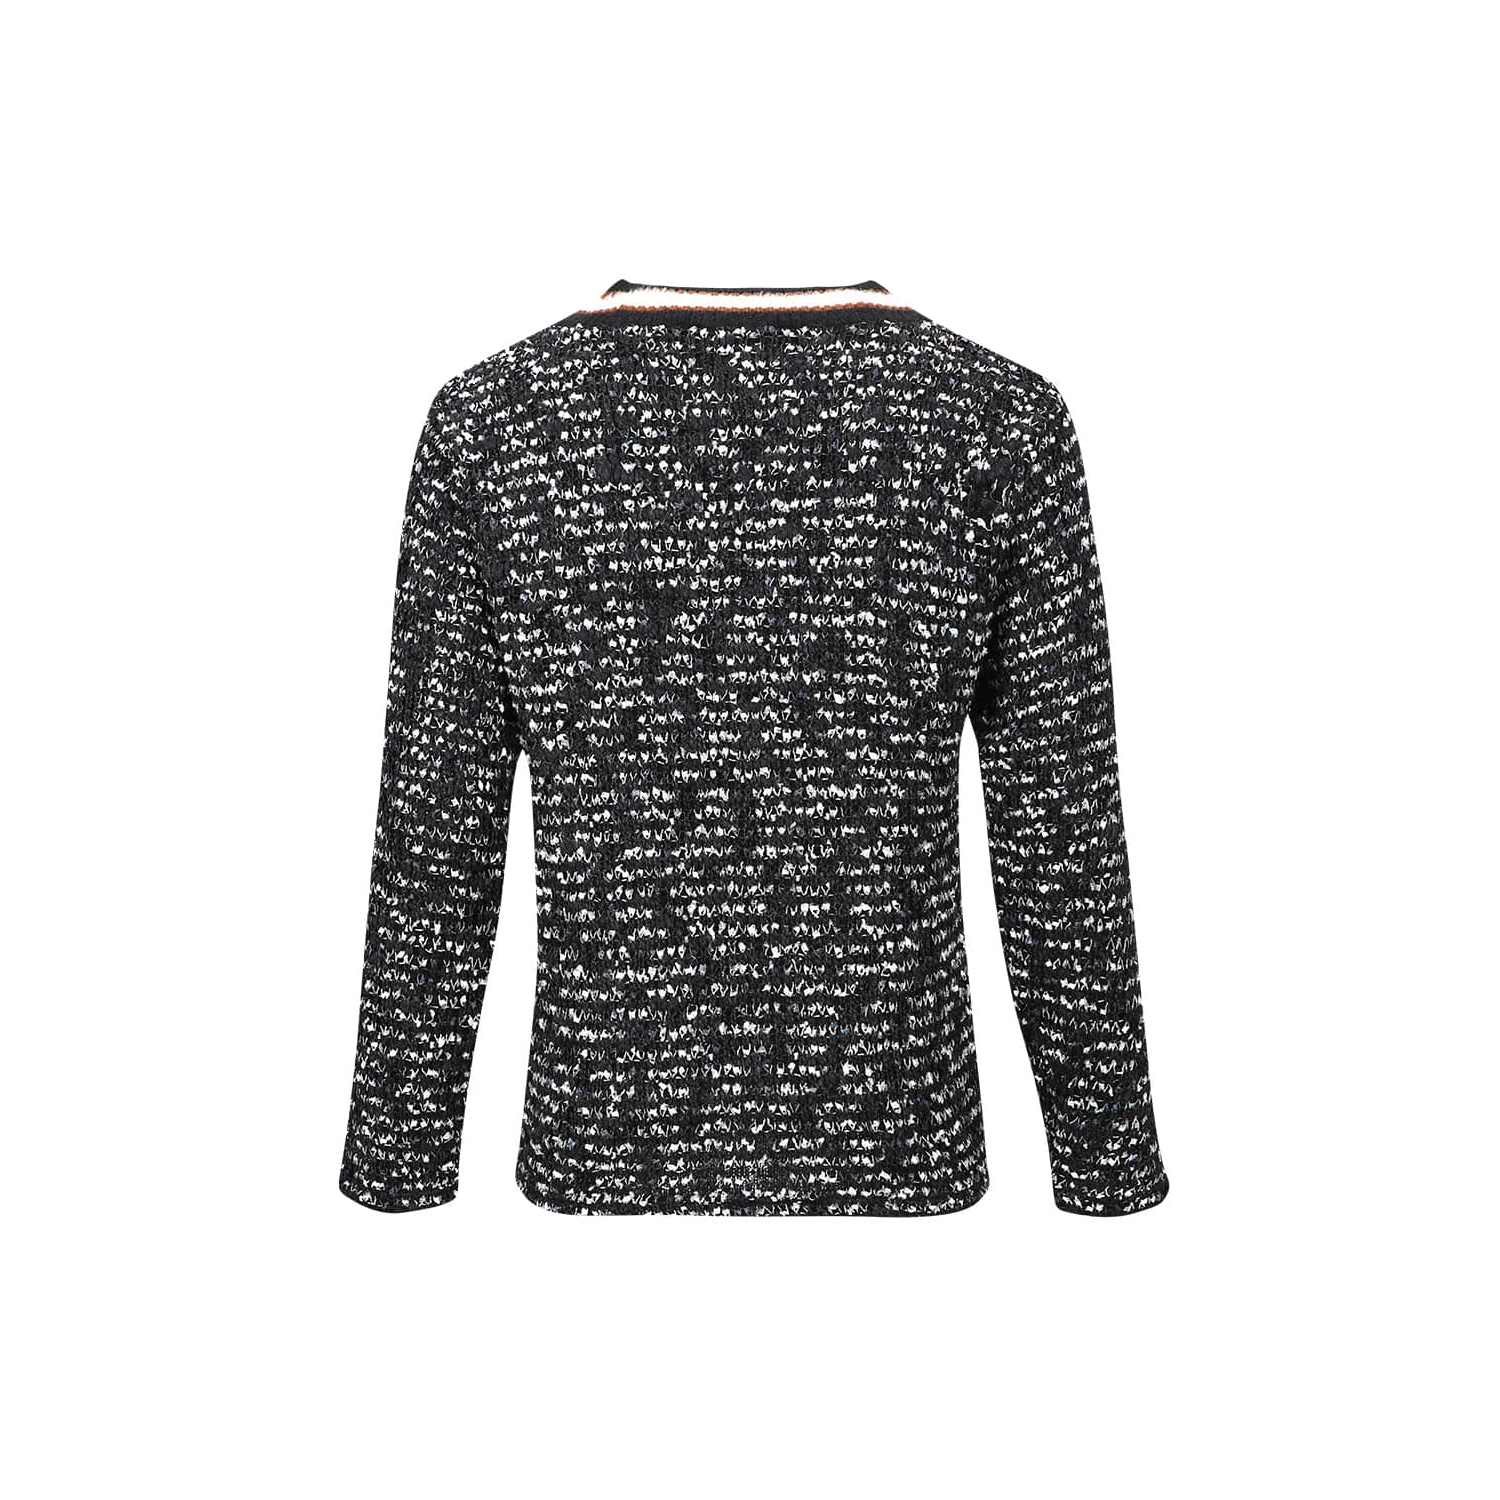 WINGS CREW-NECK SWEATER [atb1033m]